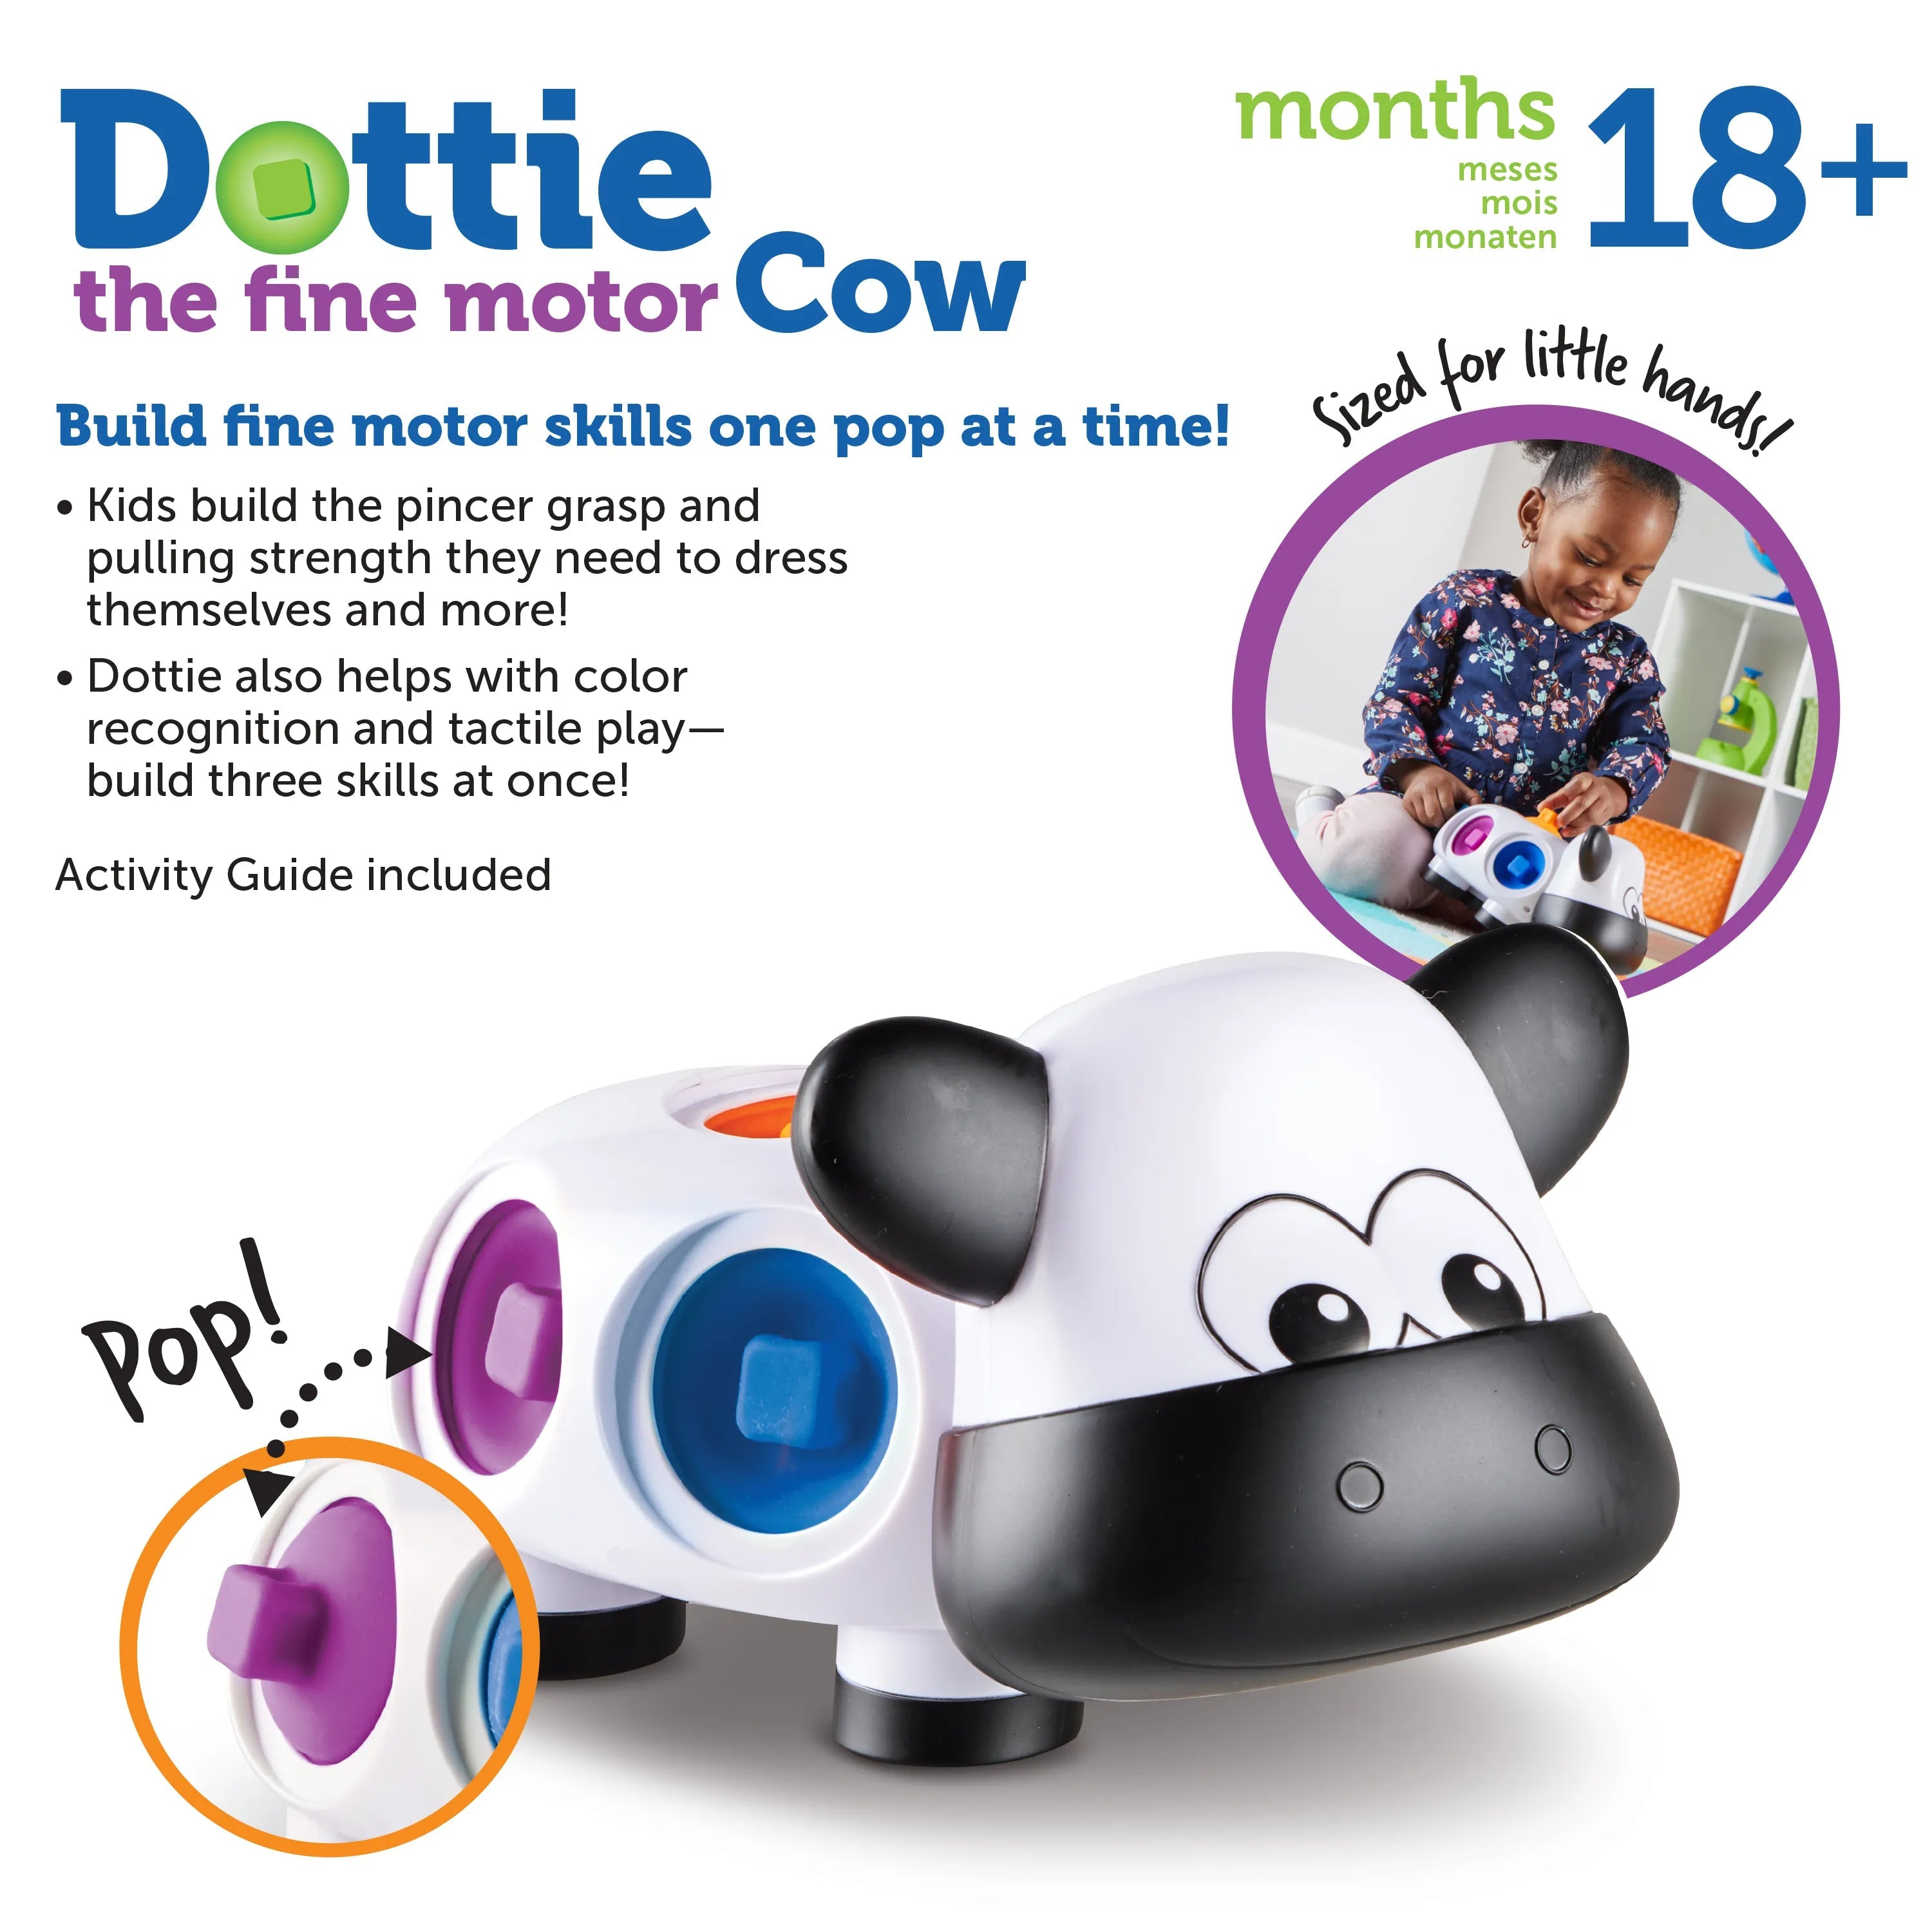 Learning Resources-Dottie the Fine Motor Cow-LER9109-Legacy Toys